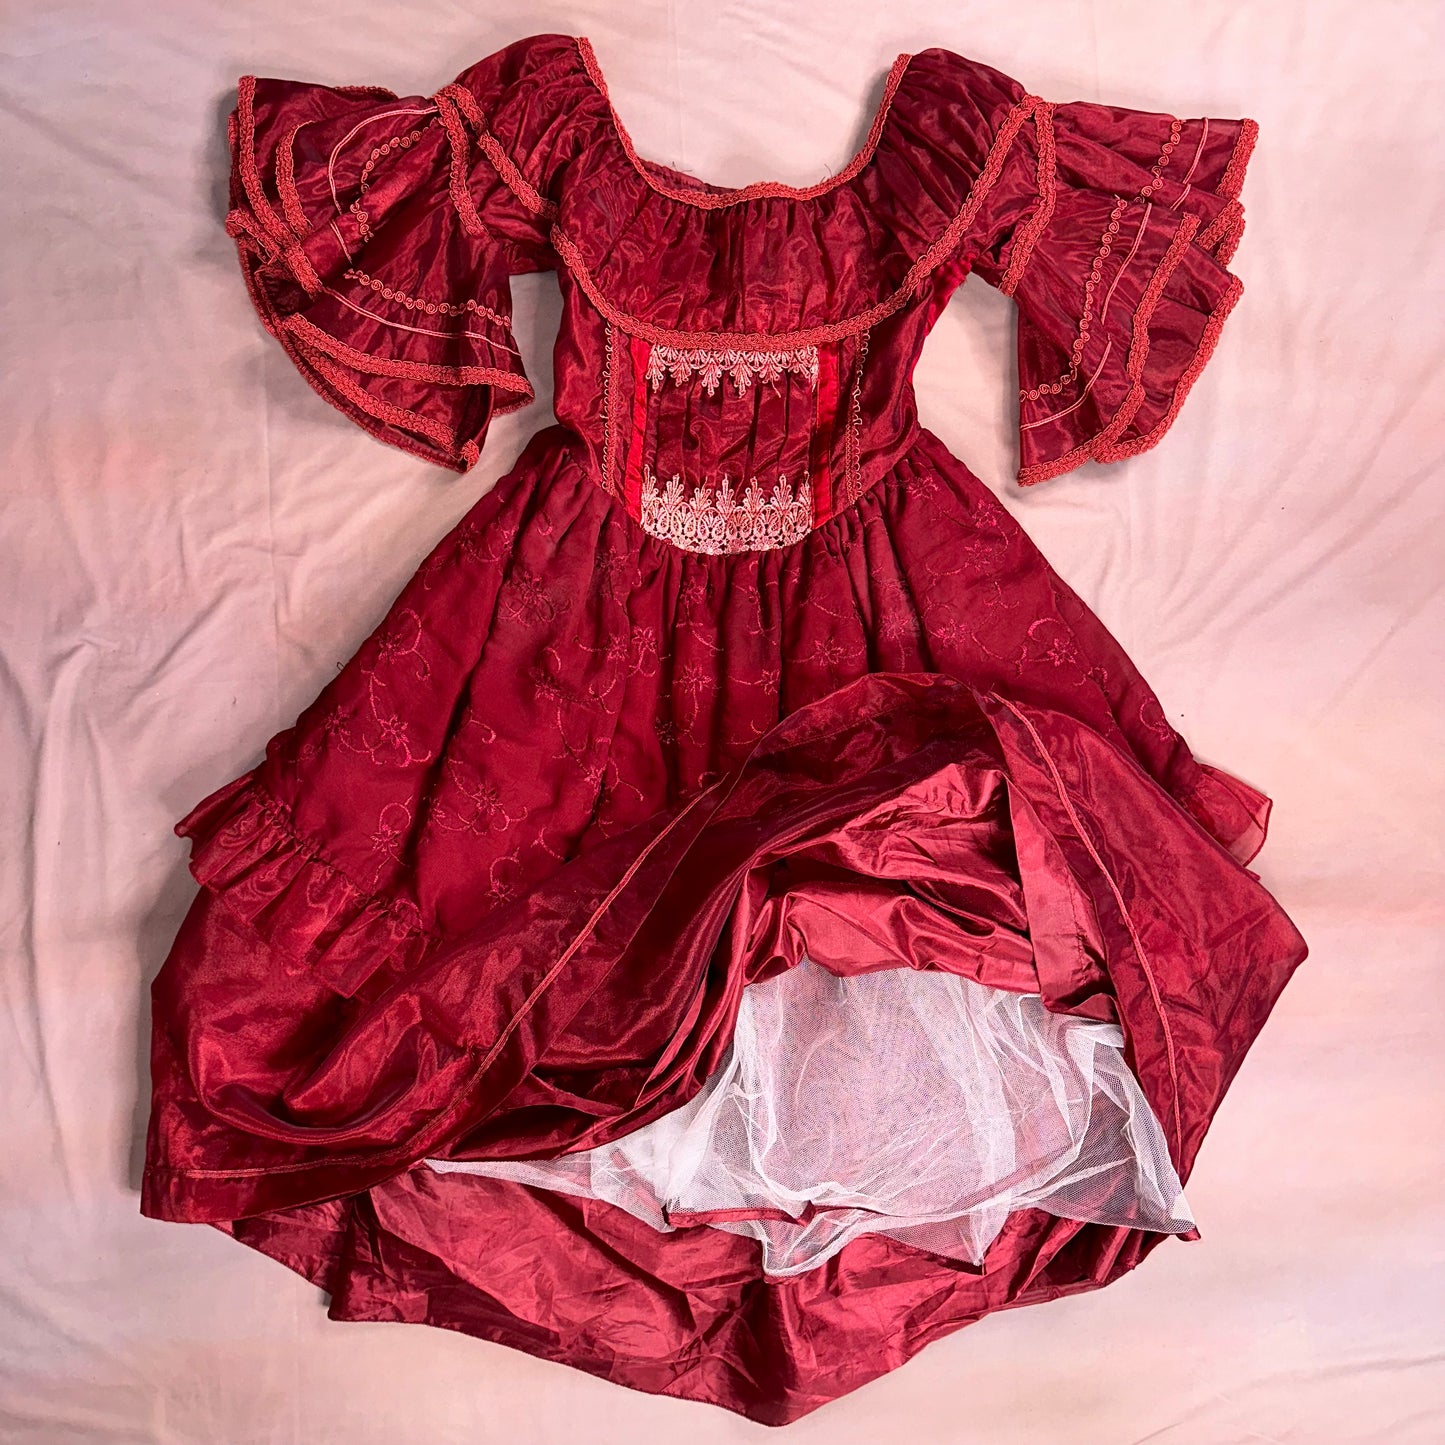 VINTAGE 80s BURGUNDY RED RUFFLE GOWN